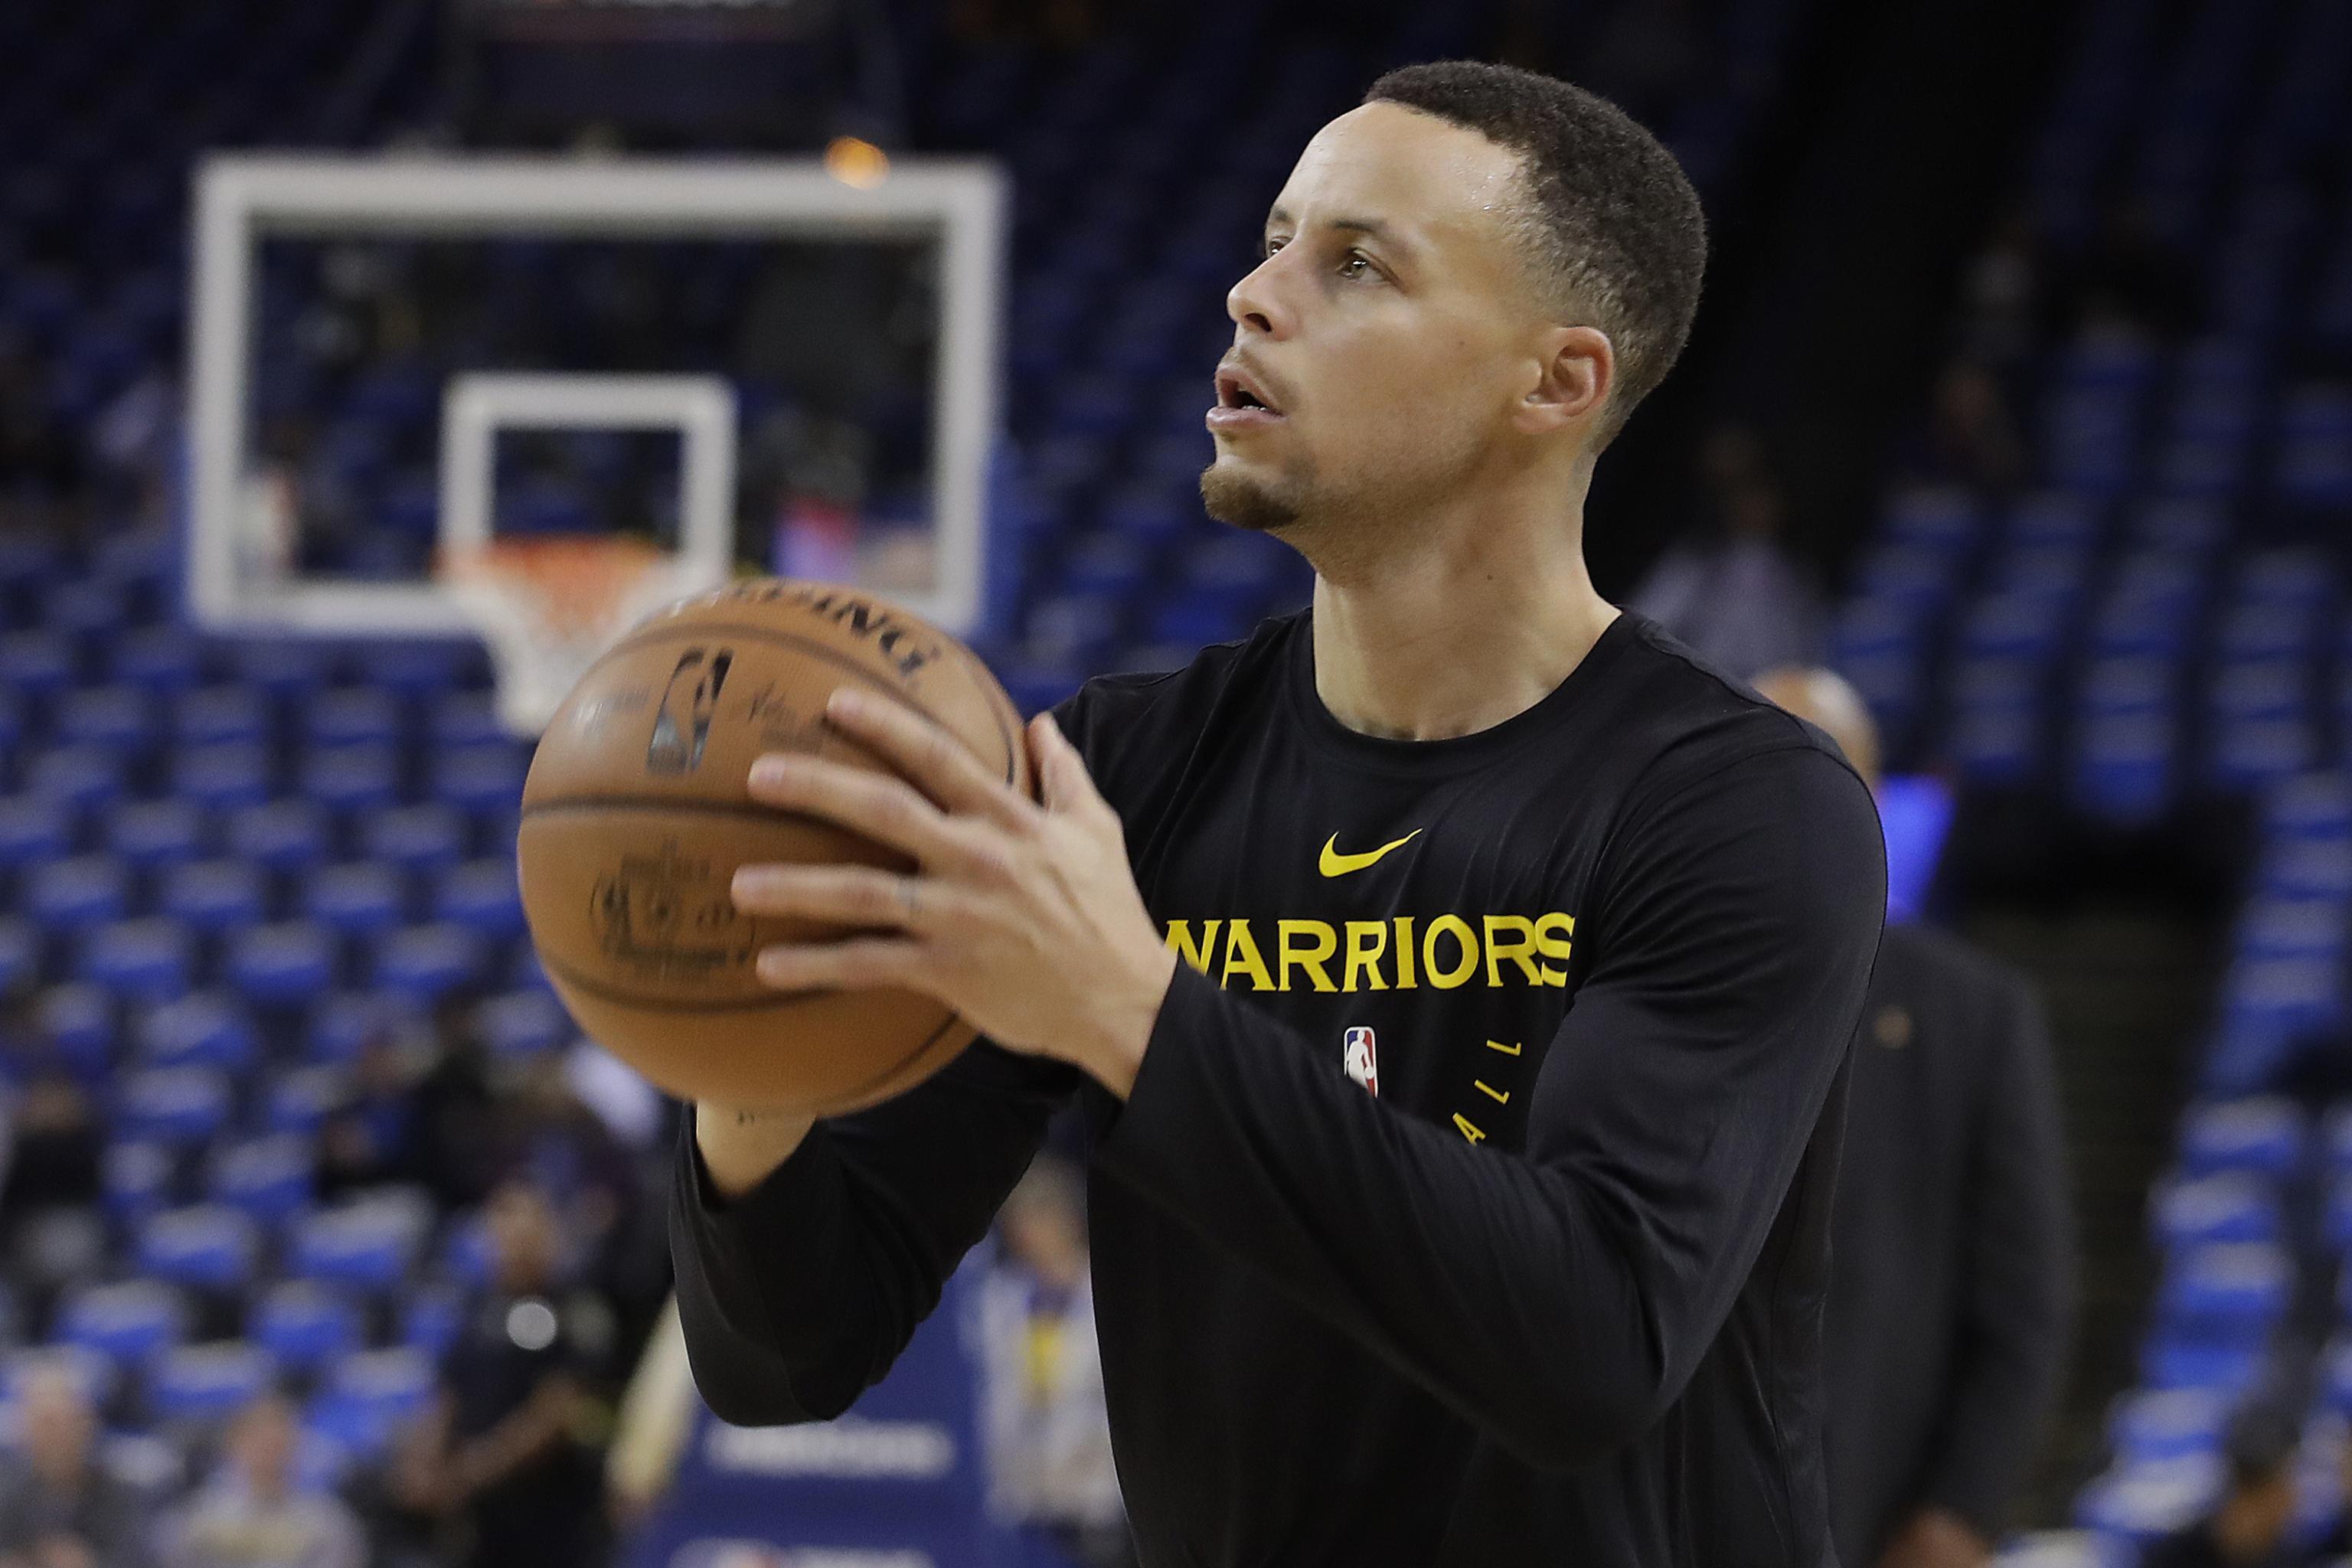 Steph Curry responds to 9-year-old's letter about offering his